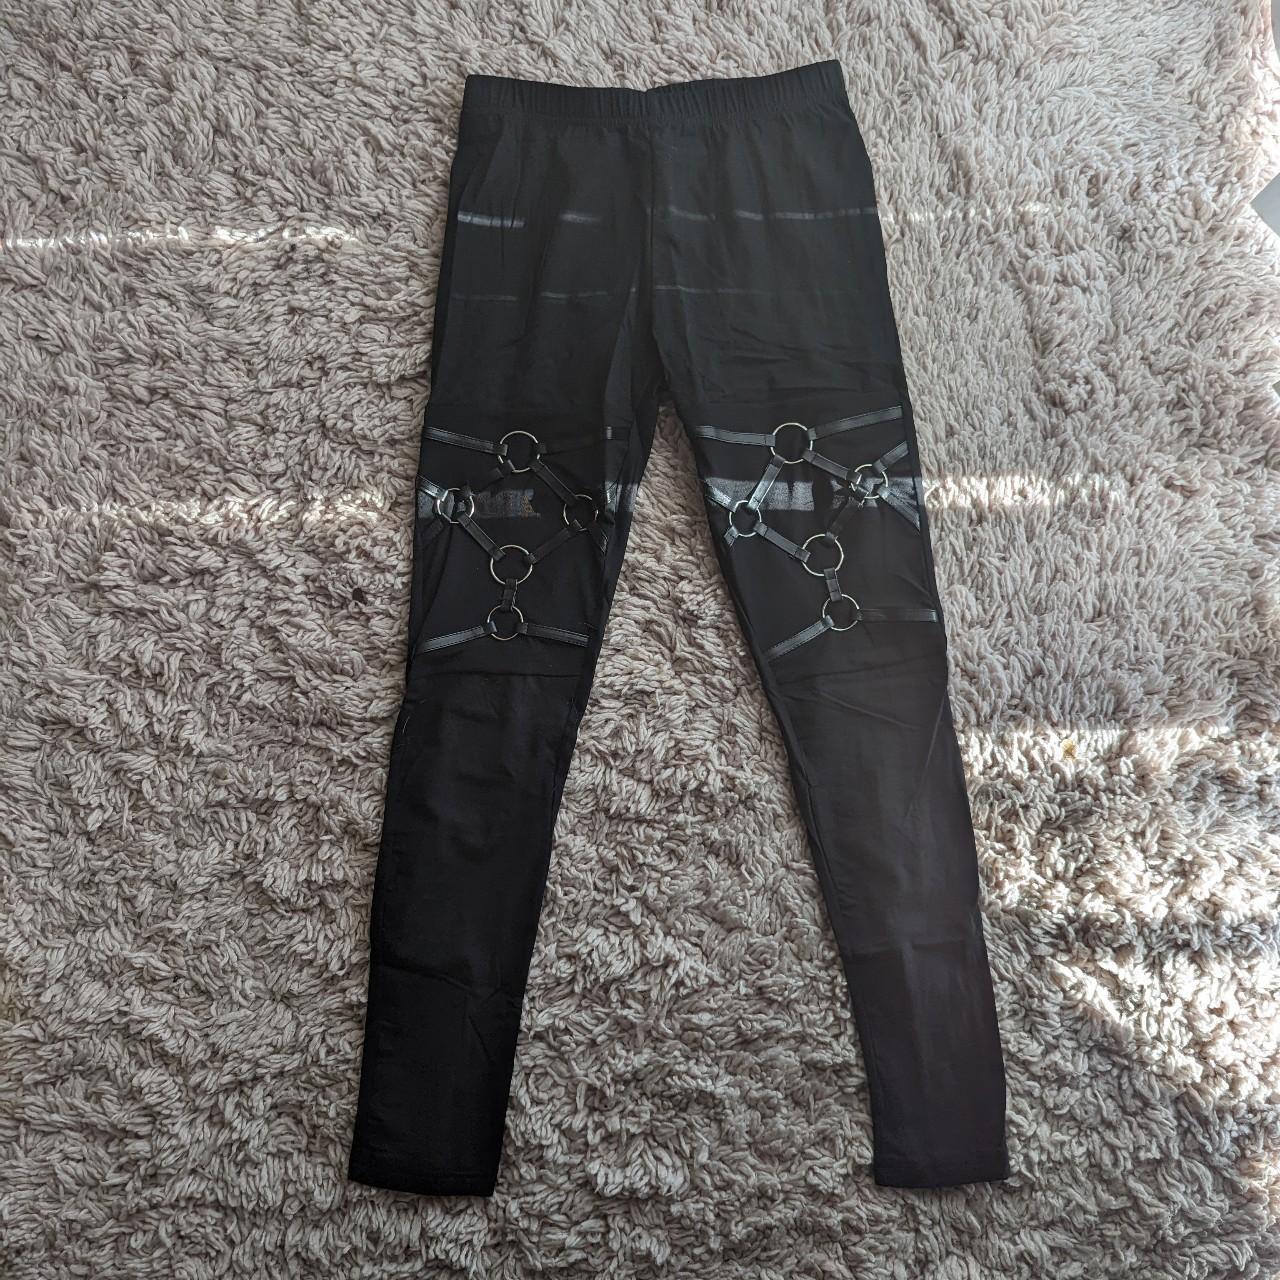 Restyle Harness Leggings size S also fits XS , Worn